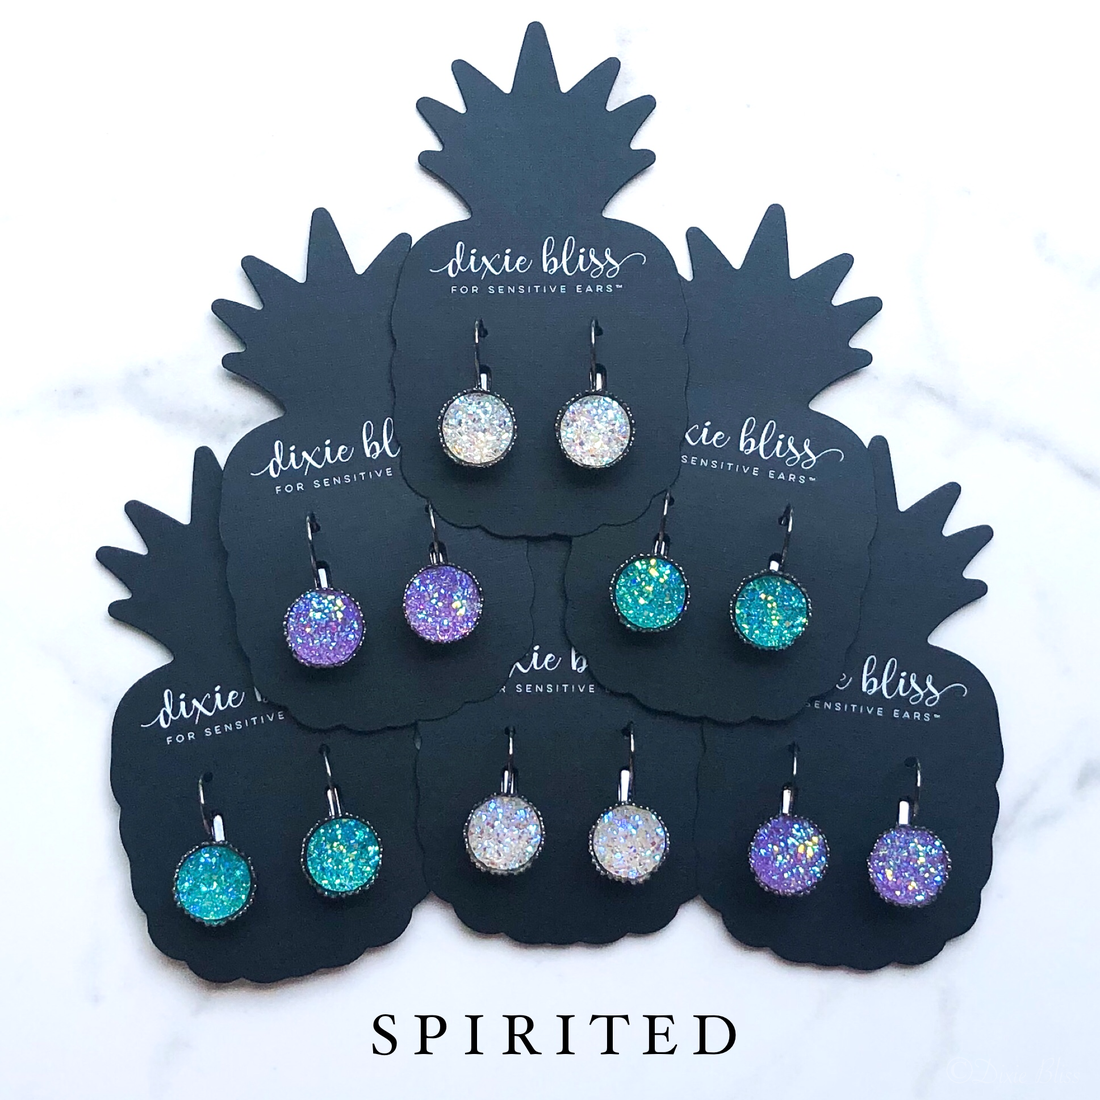 Dixie Bliss Earrings: Iridescent Spirited Lever Backs Hypoallergenic made in the USA woman-owned company druzy shiny diamond-like sparkle and shine safe & made for sensitive ears, Purple Crystal Clear White and Aqua Teal Turquoise Color